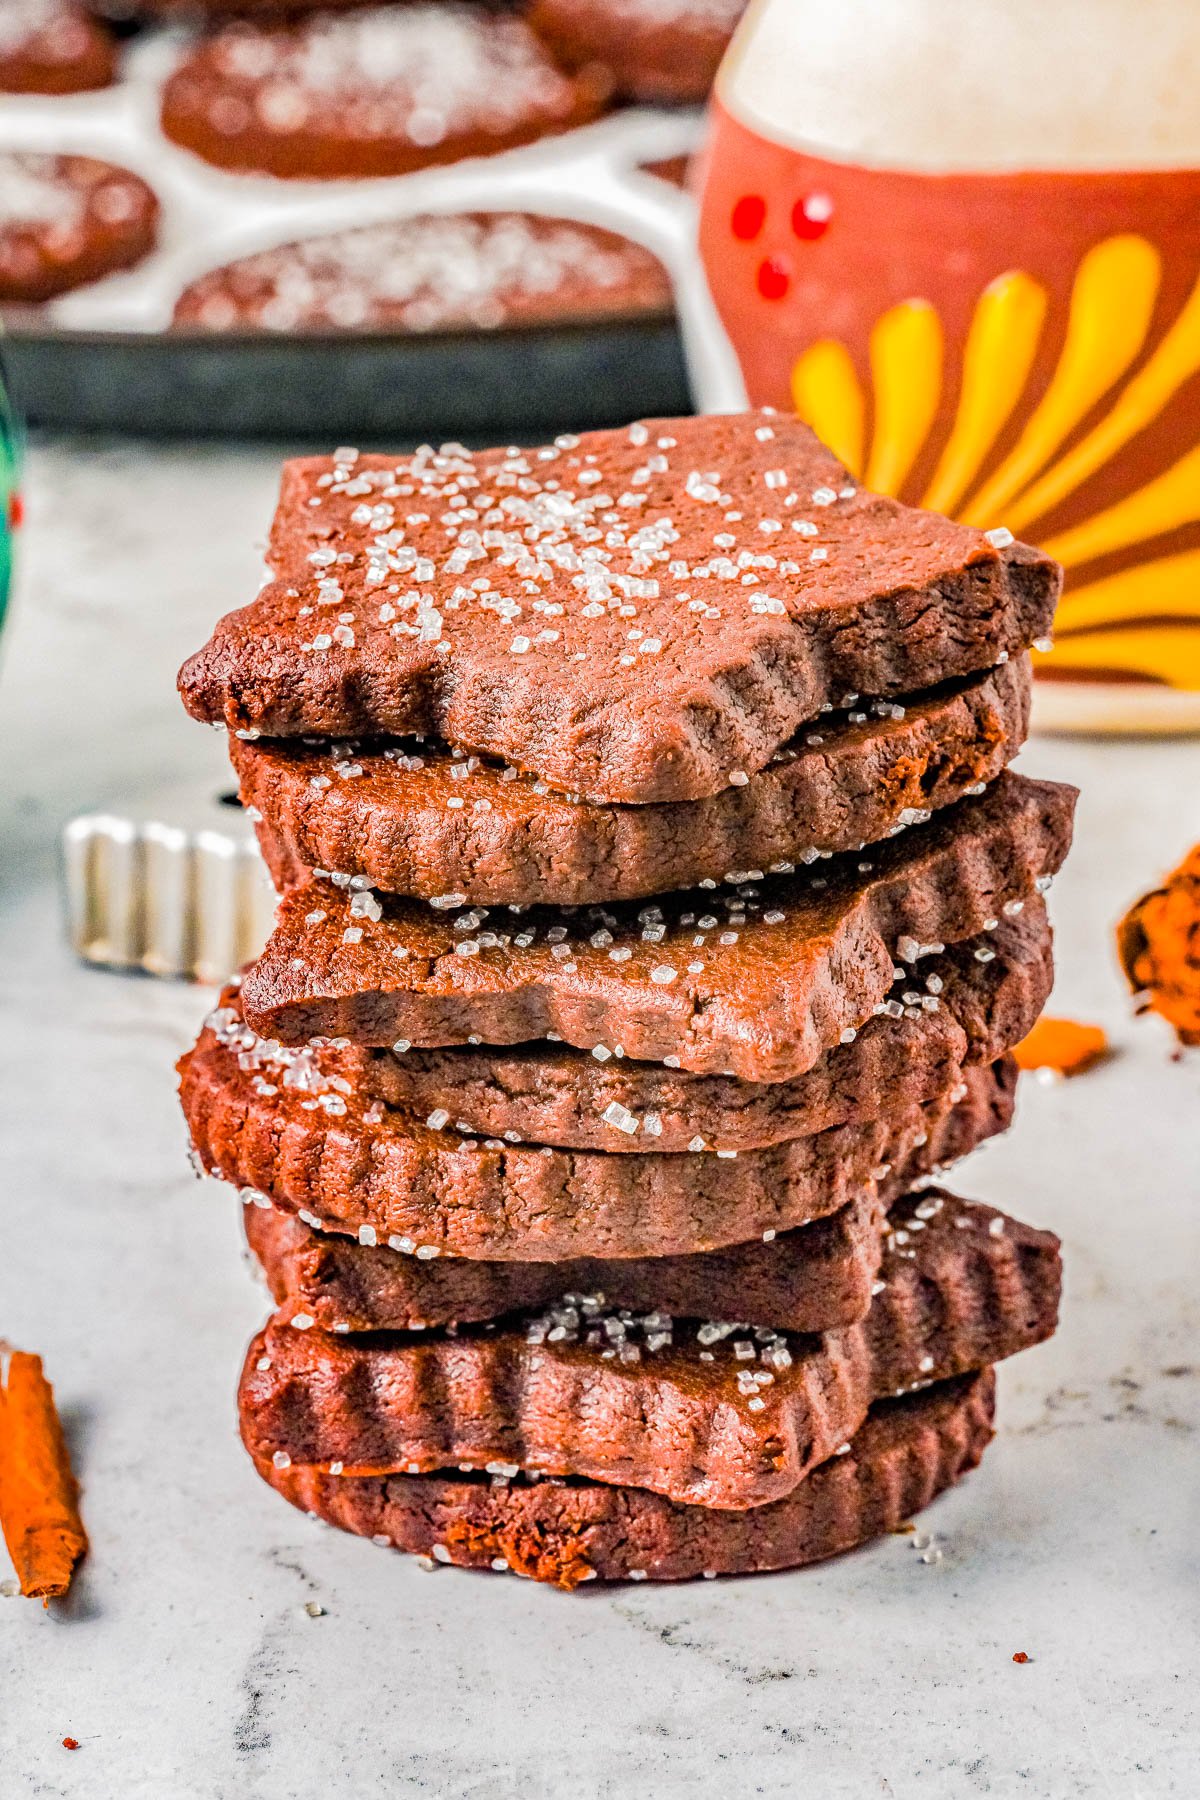 Mexican Chocolate Shortbread Cookies - These buttery shortbread cookies are full of chocolate, cinnamon-and-sugar, and a bit of spice thanks to a couple unique ingredients! They remind me of a good cup of Mexican hot chocolate, in cookie form. Great for cookie exchanges because they keep well and the perfect conversation piece cookie to set out at your next holiday party or fiesta!